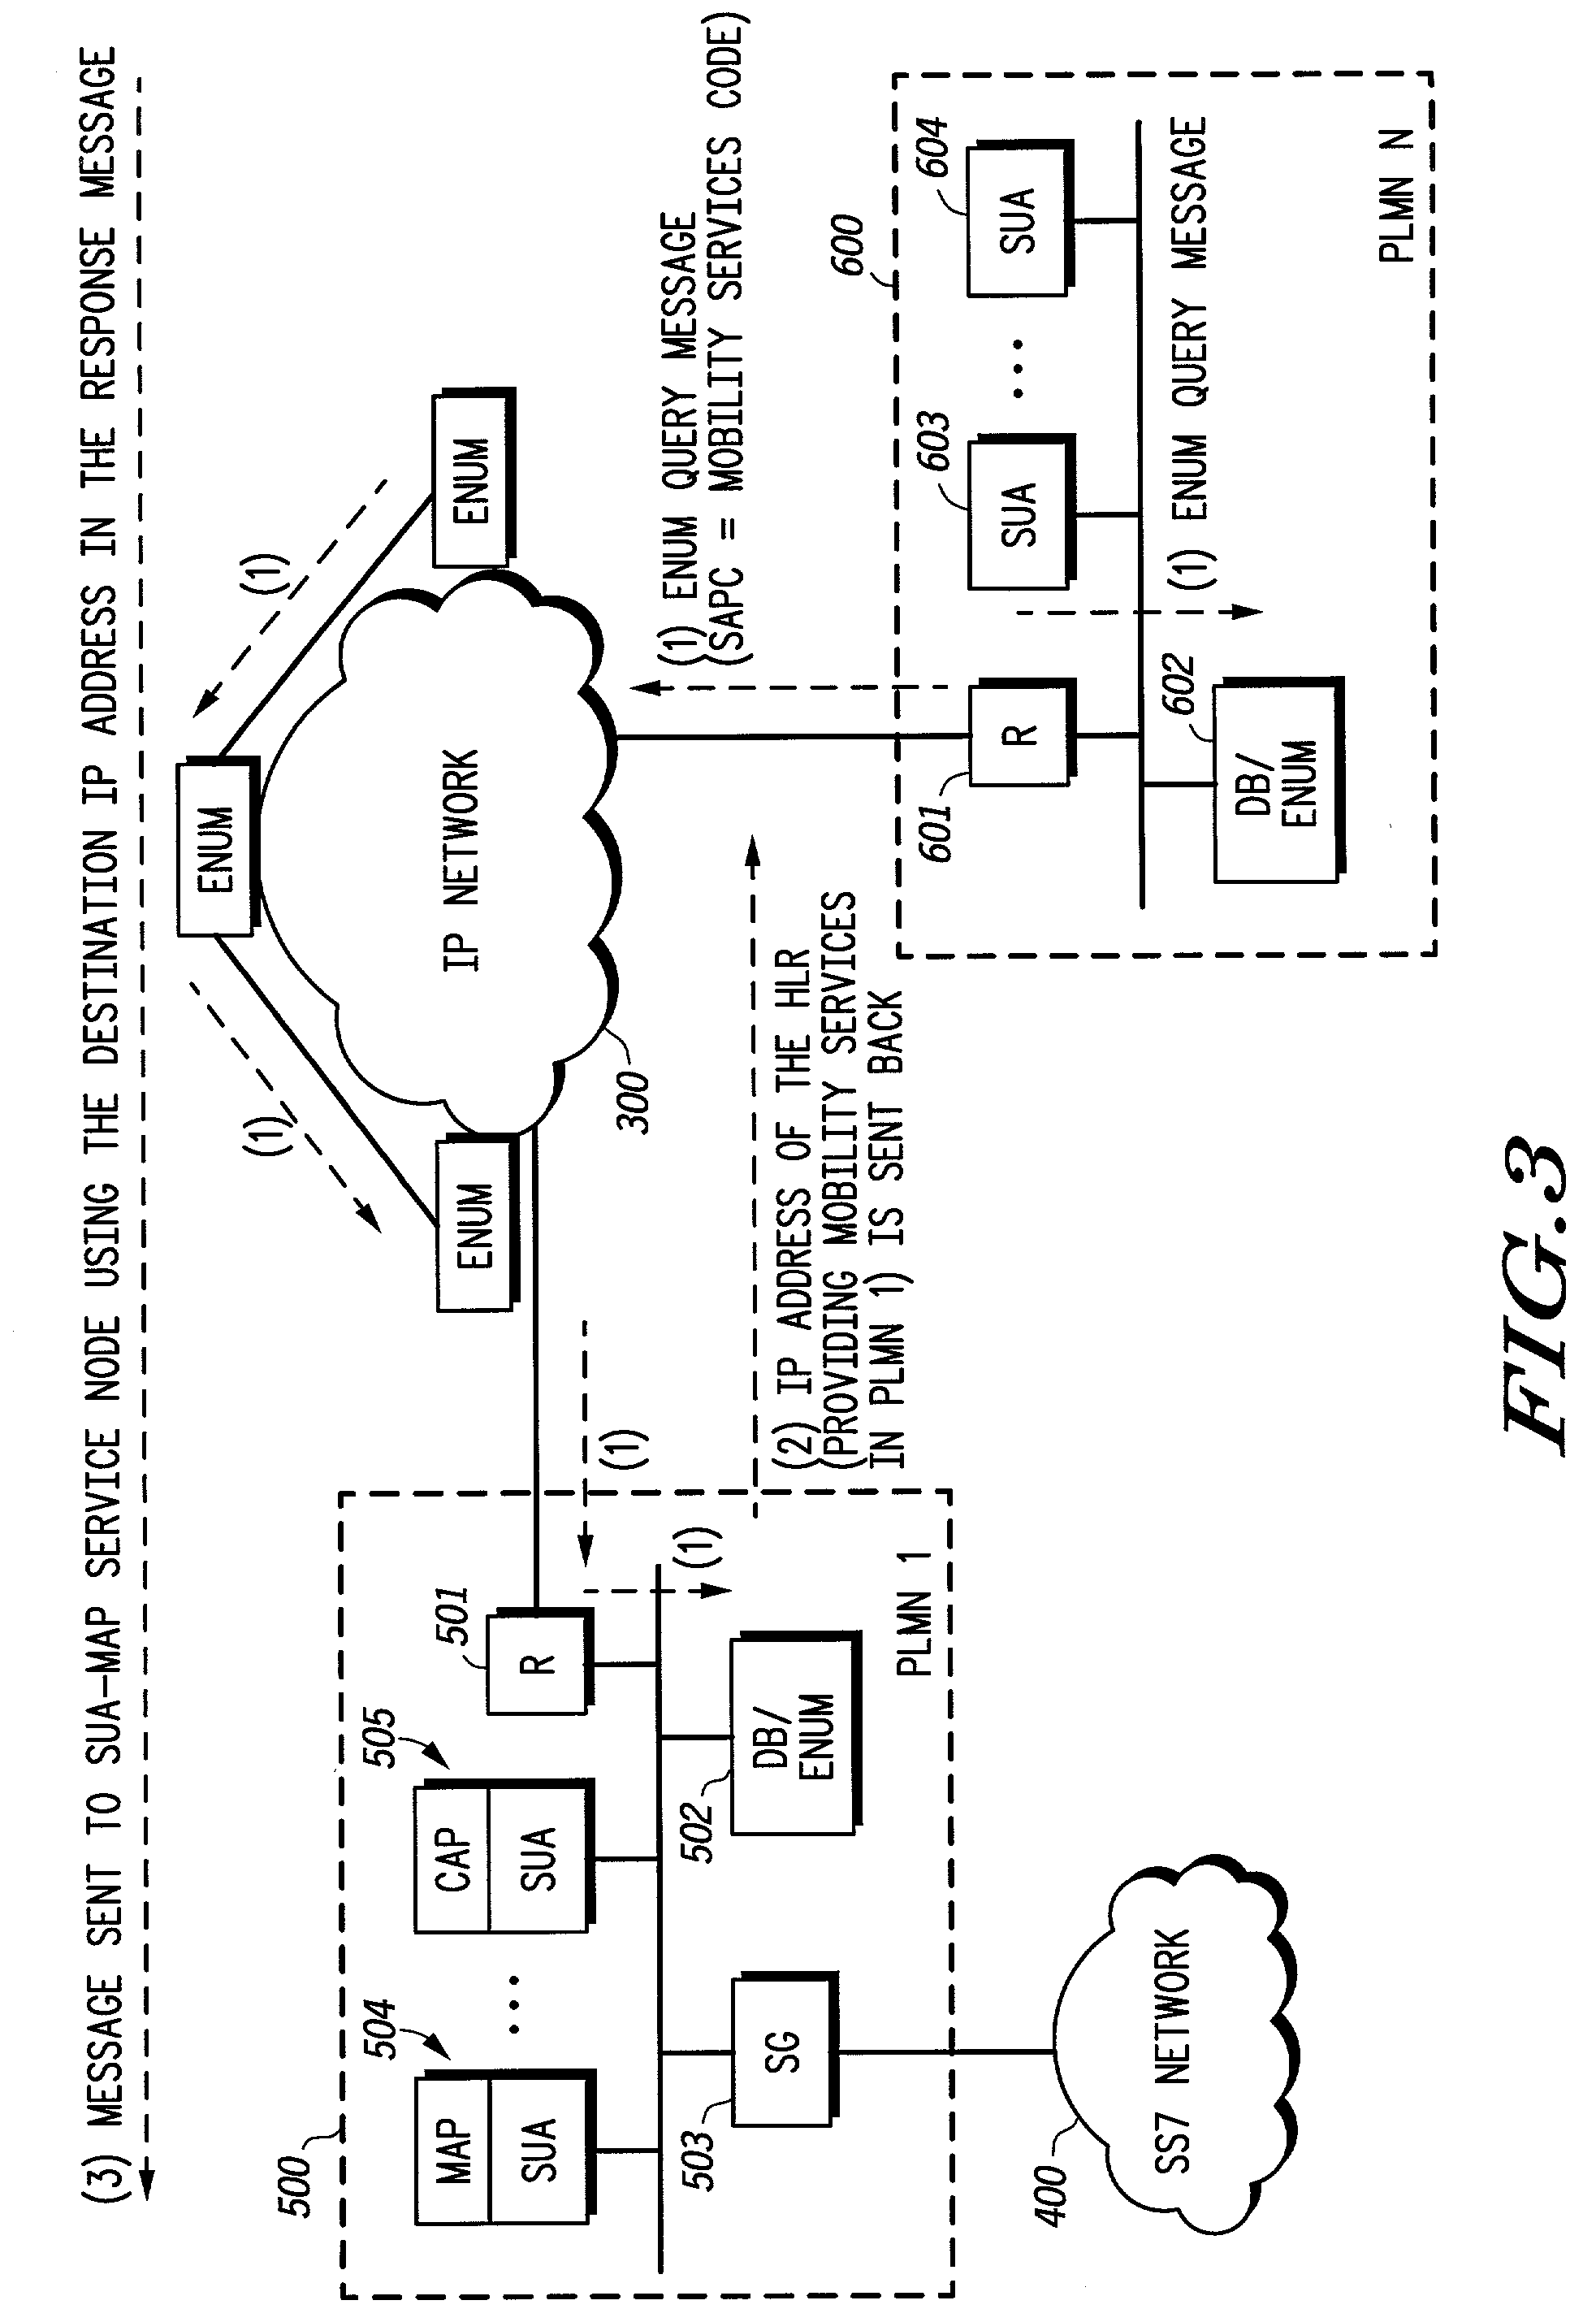 Method and apparatus for a telecommunications network to communicate using an internet protocol